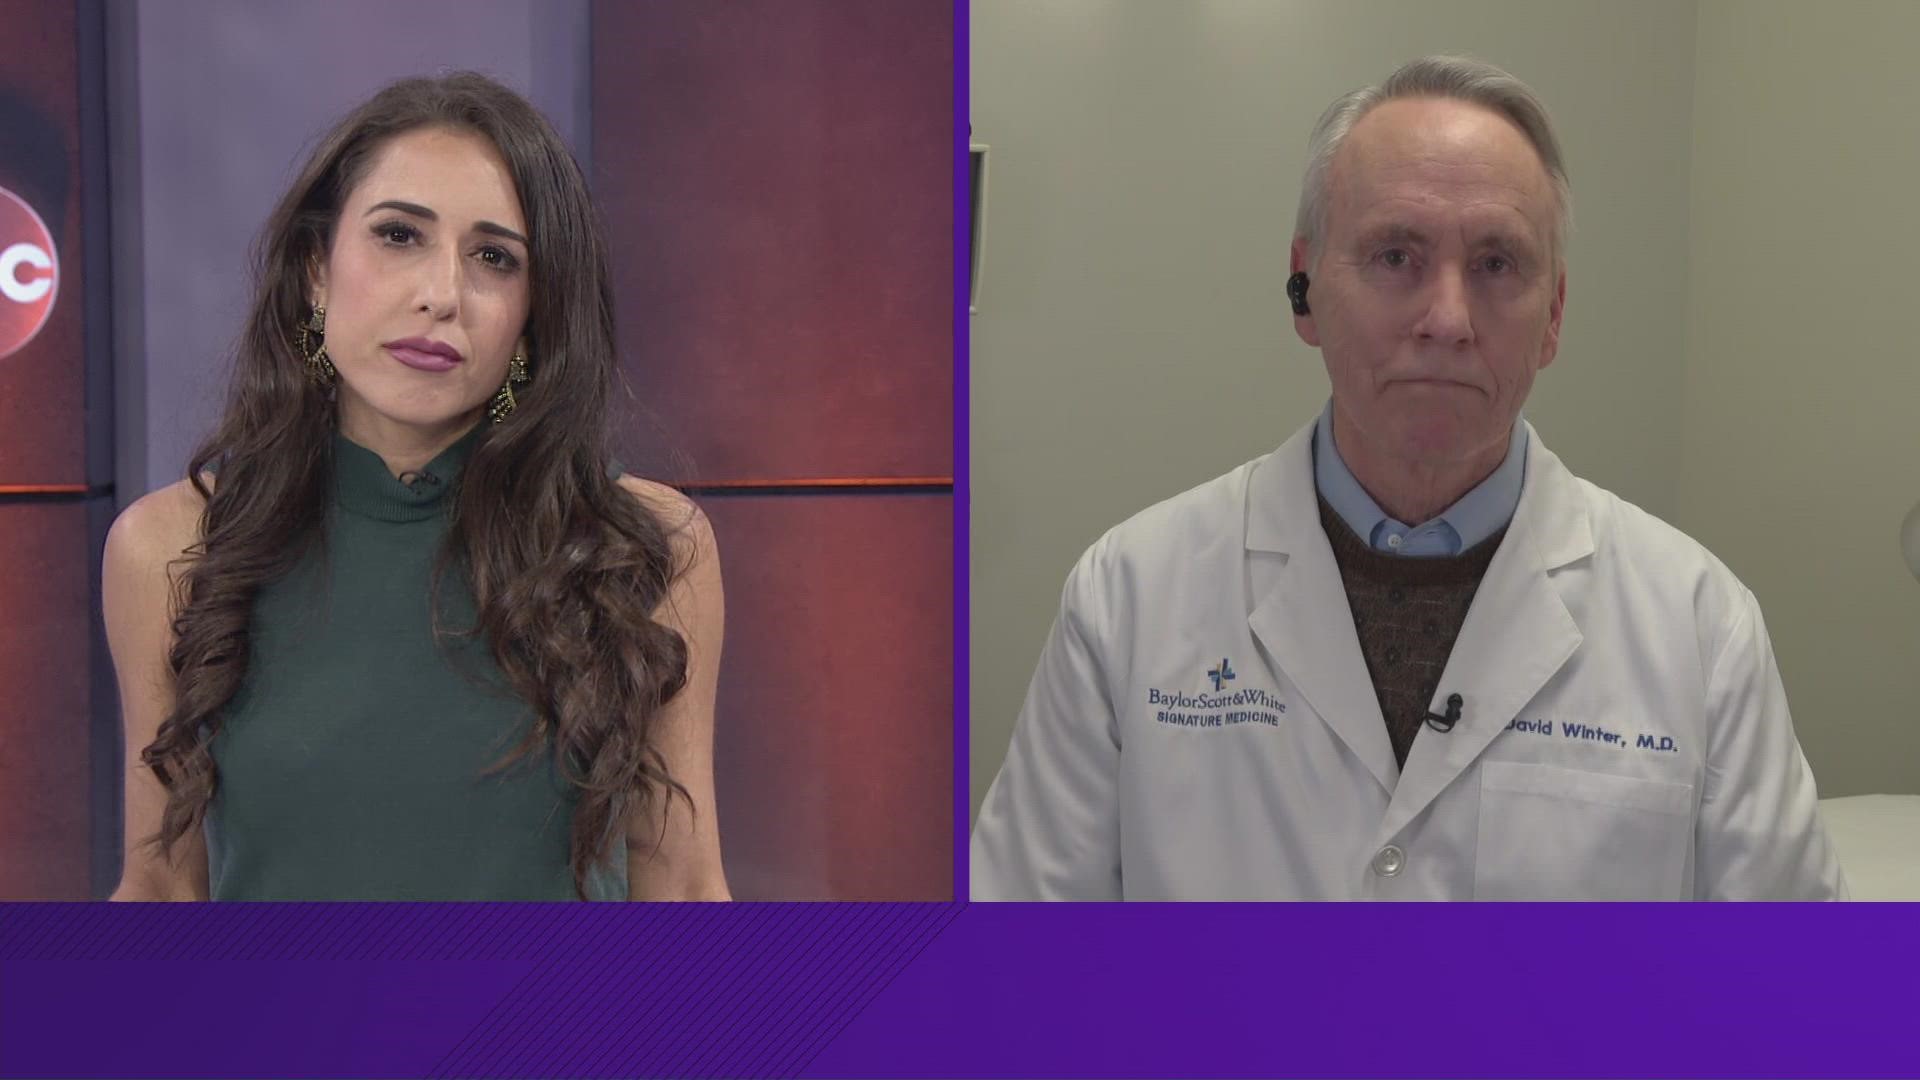 Dr. David Winter joined WFAA Midday for the latest update on COVID-19 in Texas.